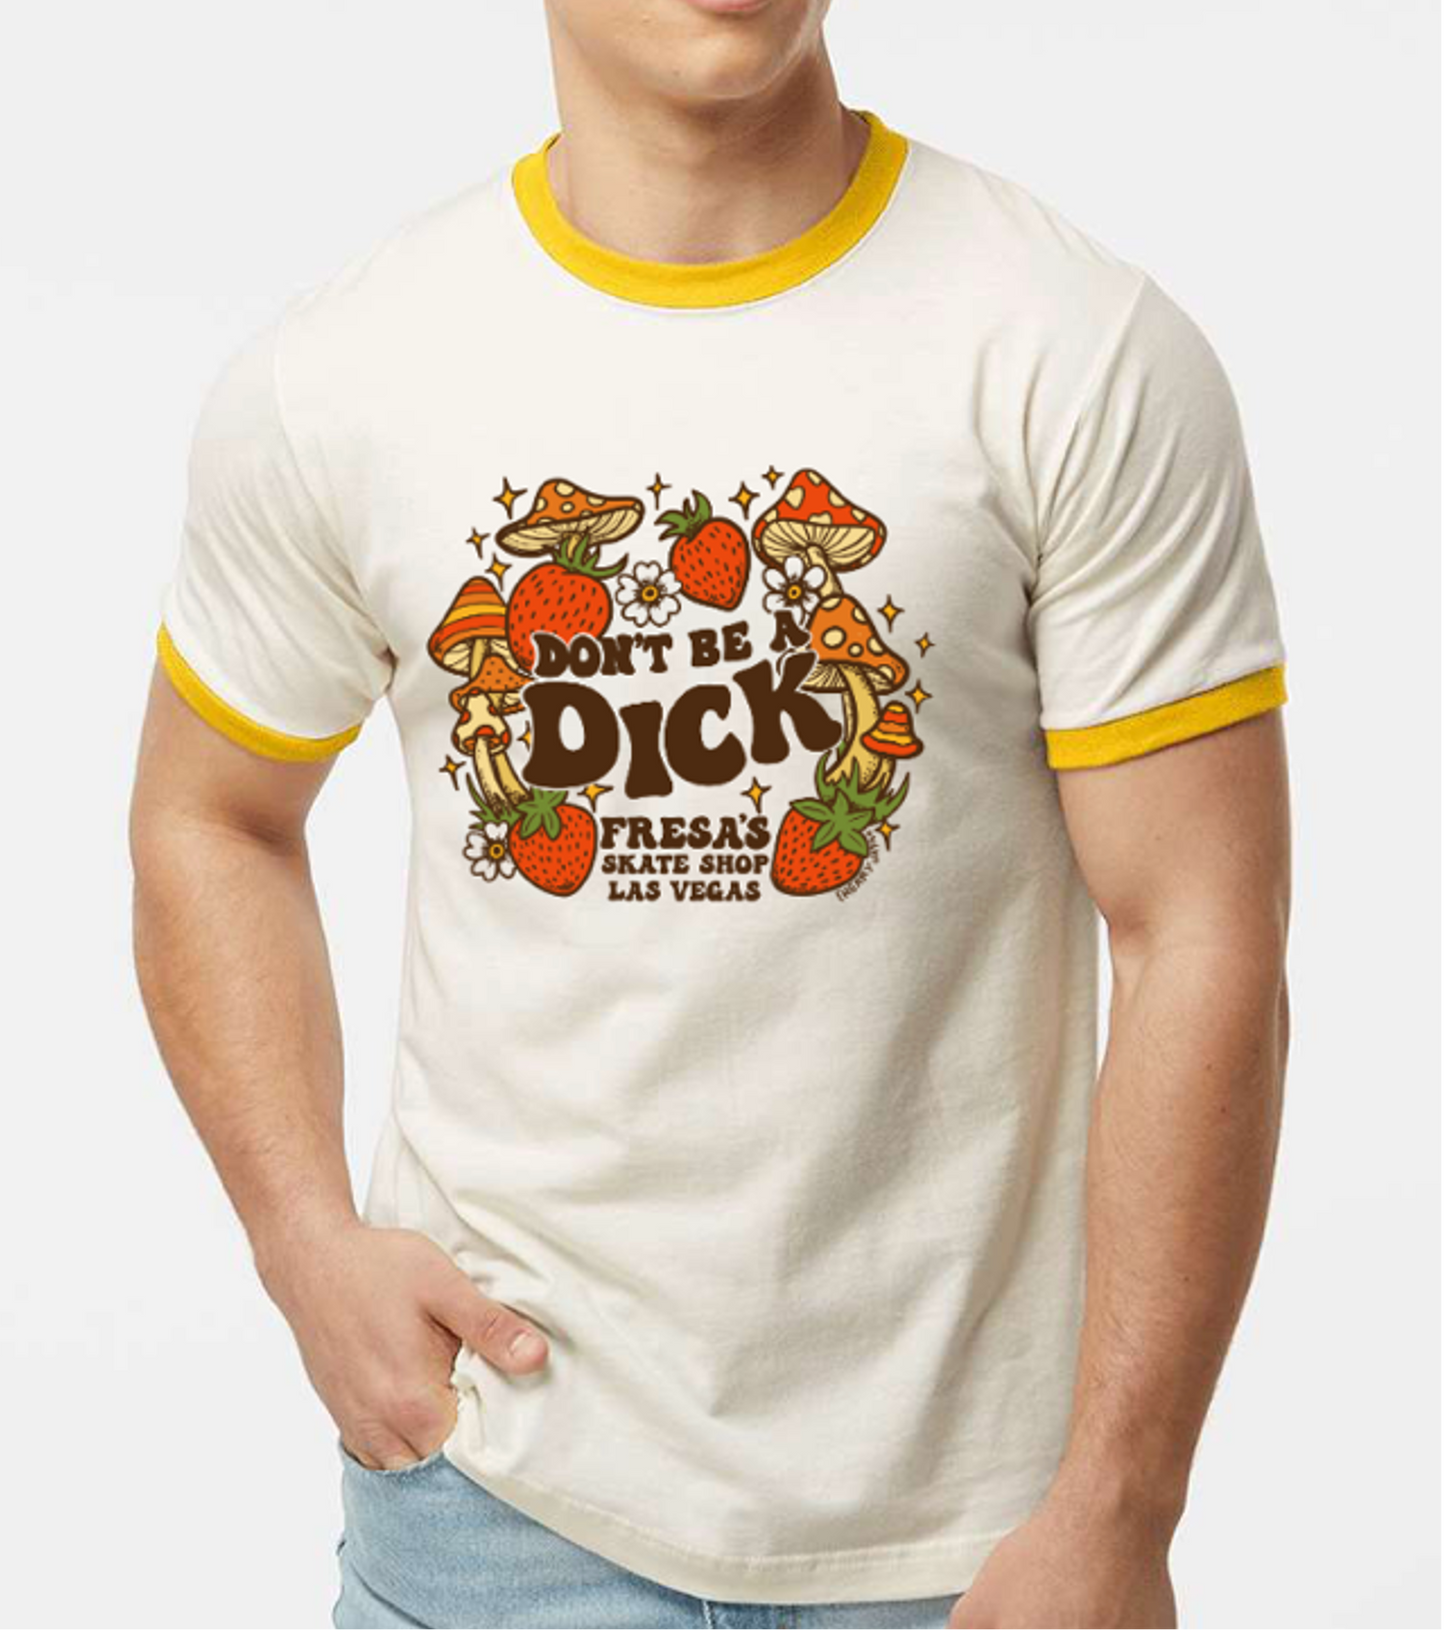 DON'T BE A DICK RINGER TEE